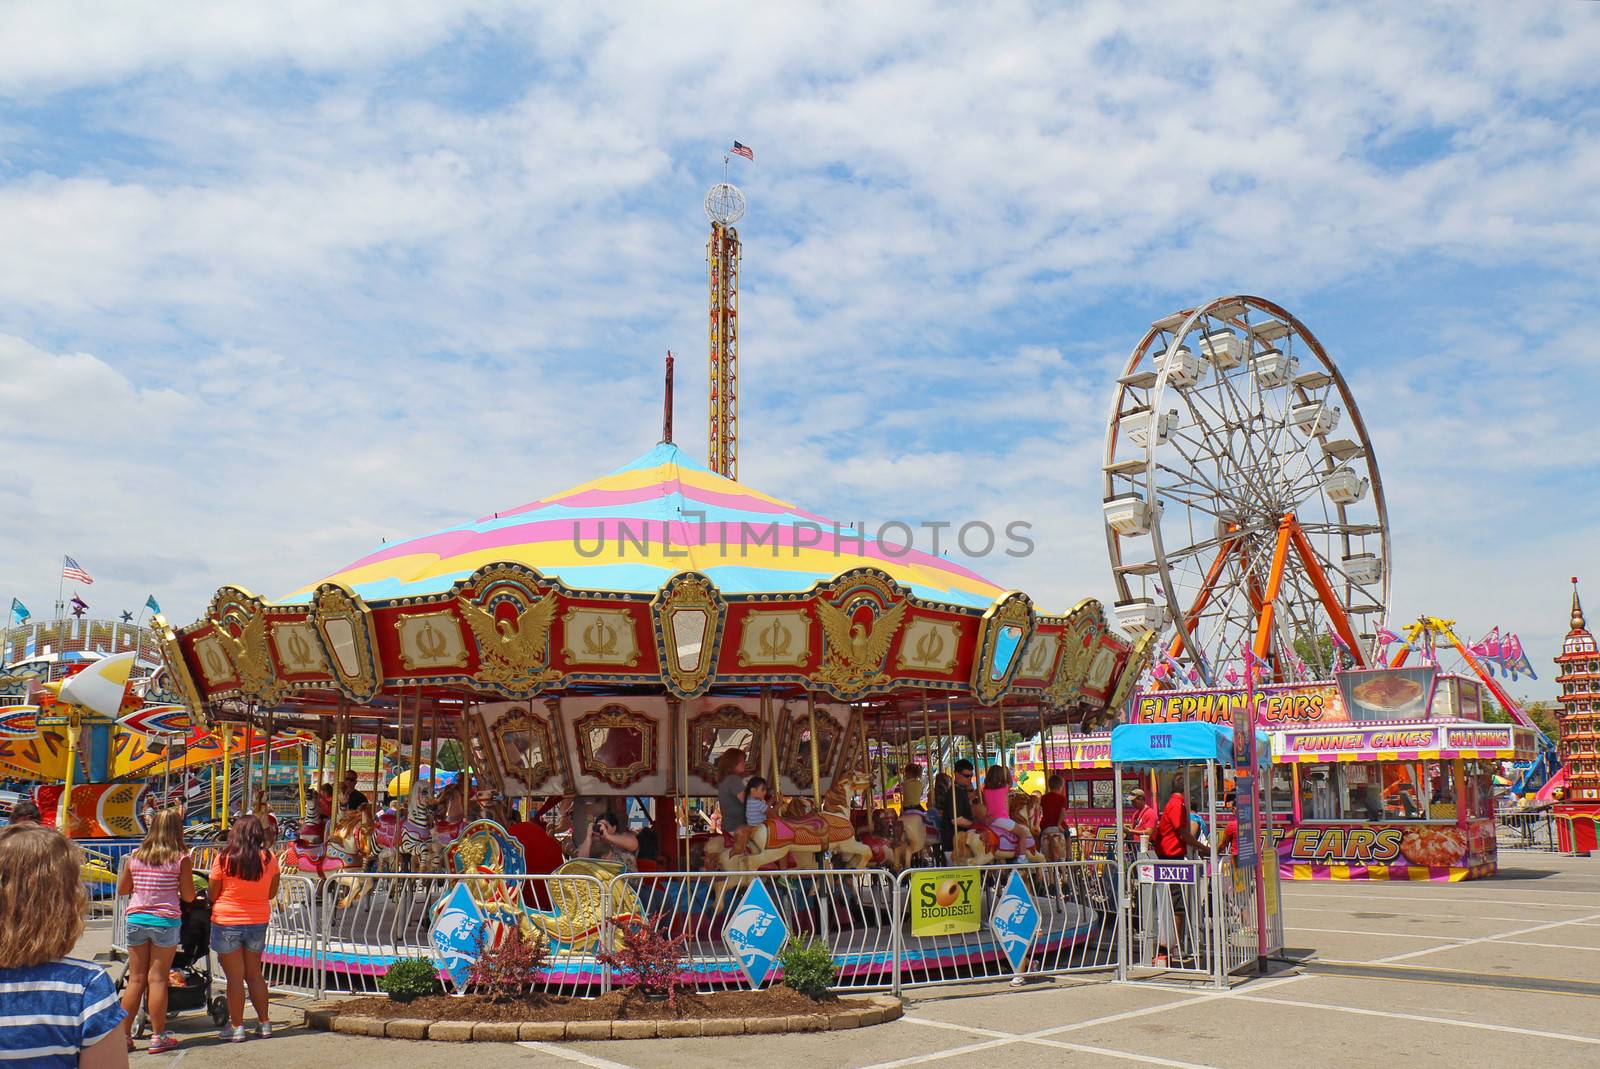 Rides on the Midway at the Indiana State Fair by sgoodwin4813